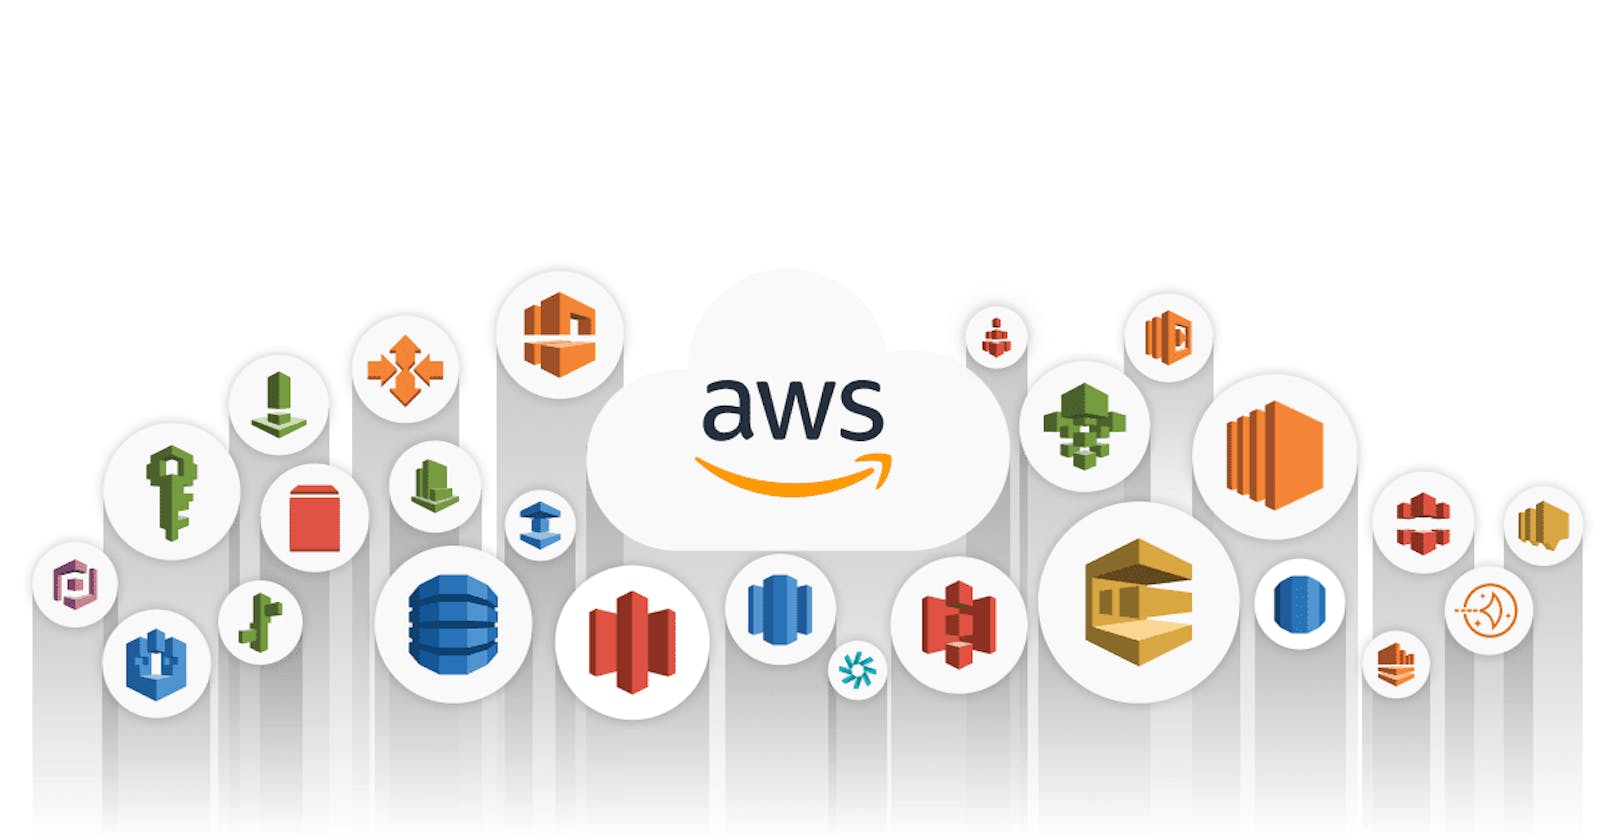 Day 1: Introduction to AWS